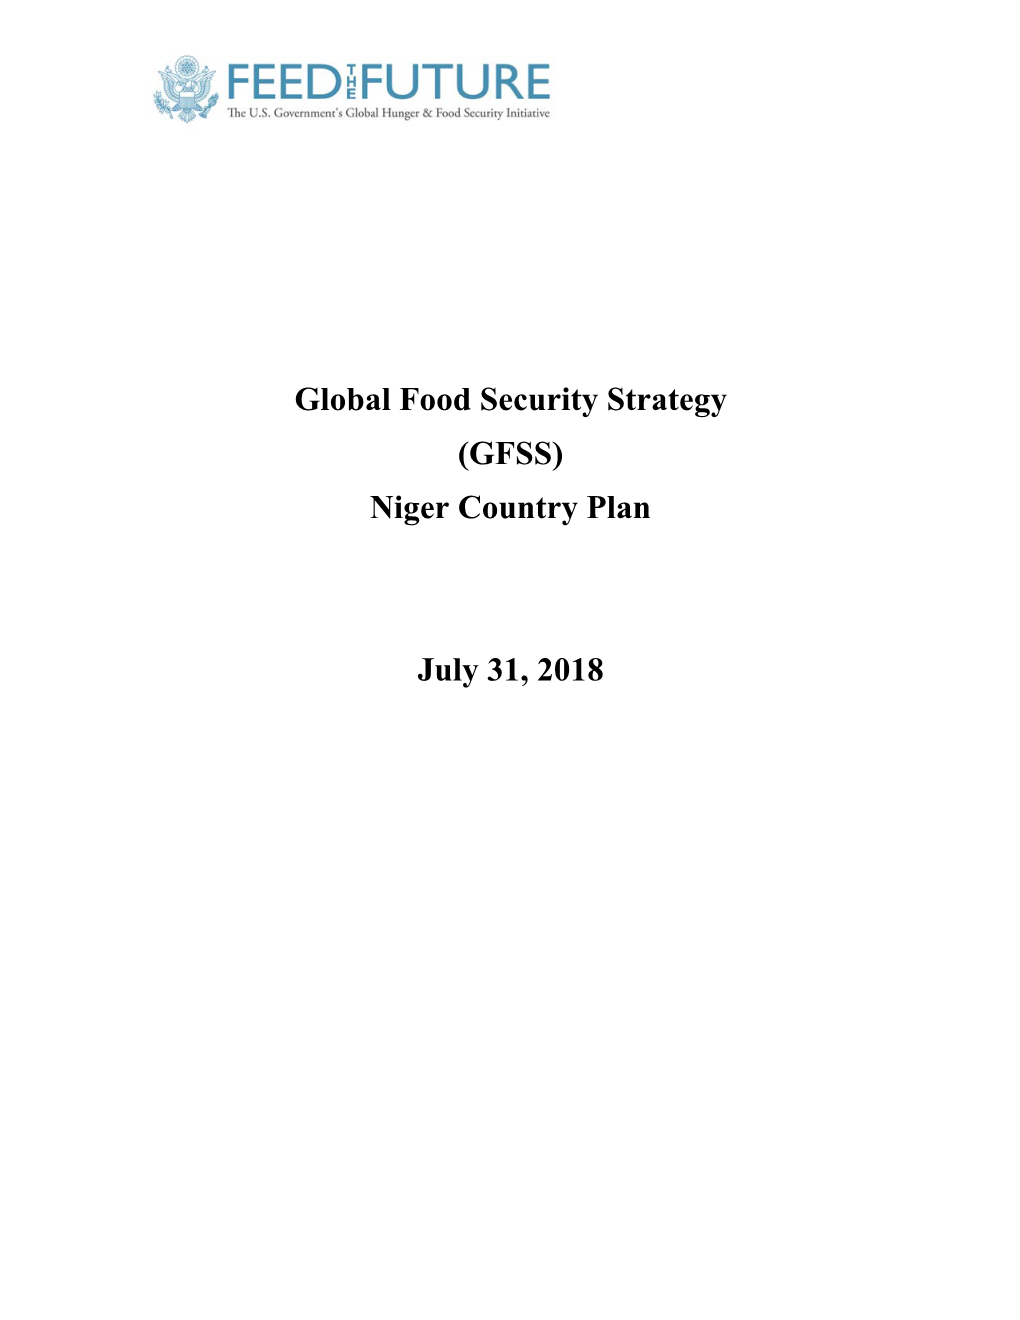 Global Food Security Strategy (GFSS), Niger Country Plan